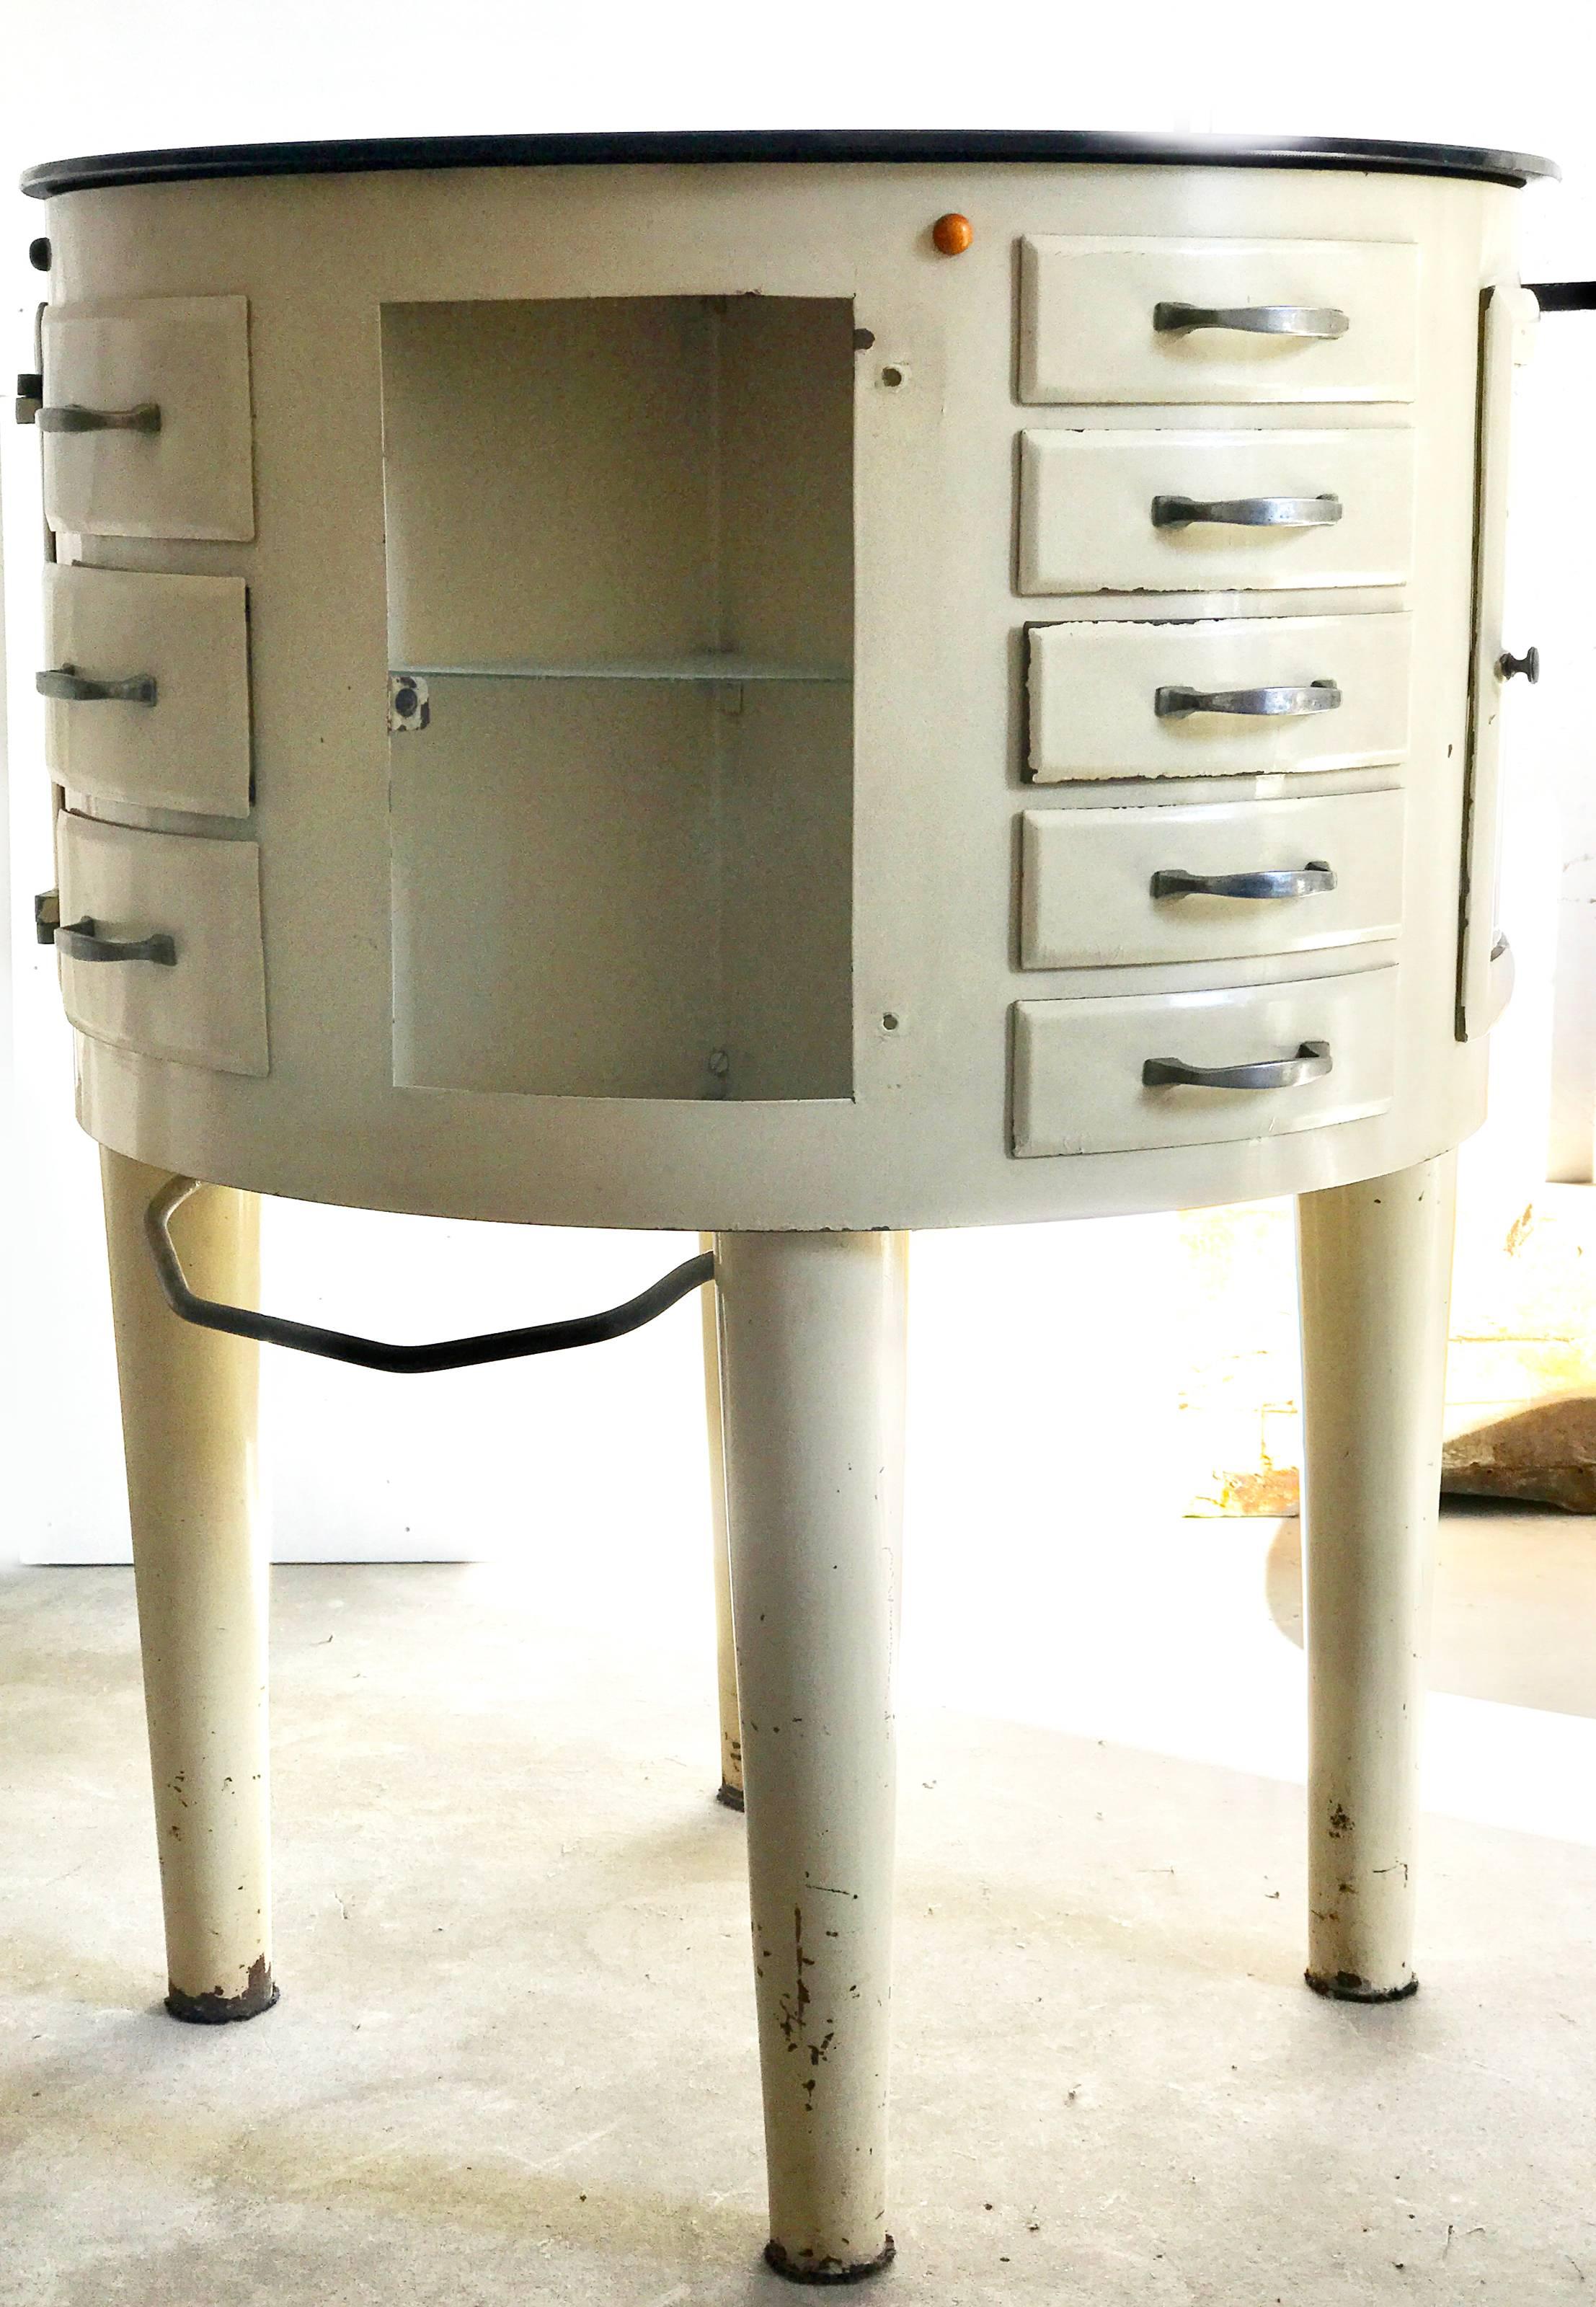 Piece of dentist furniture with a black glass revolving countertop and enameled iron storage unit that is also rotatory. It has 3 units of drawers one with 3 drawers and two with five drawers, all of them have glass interior and 3 units with one